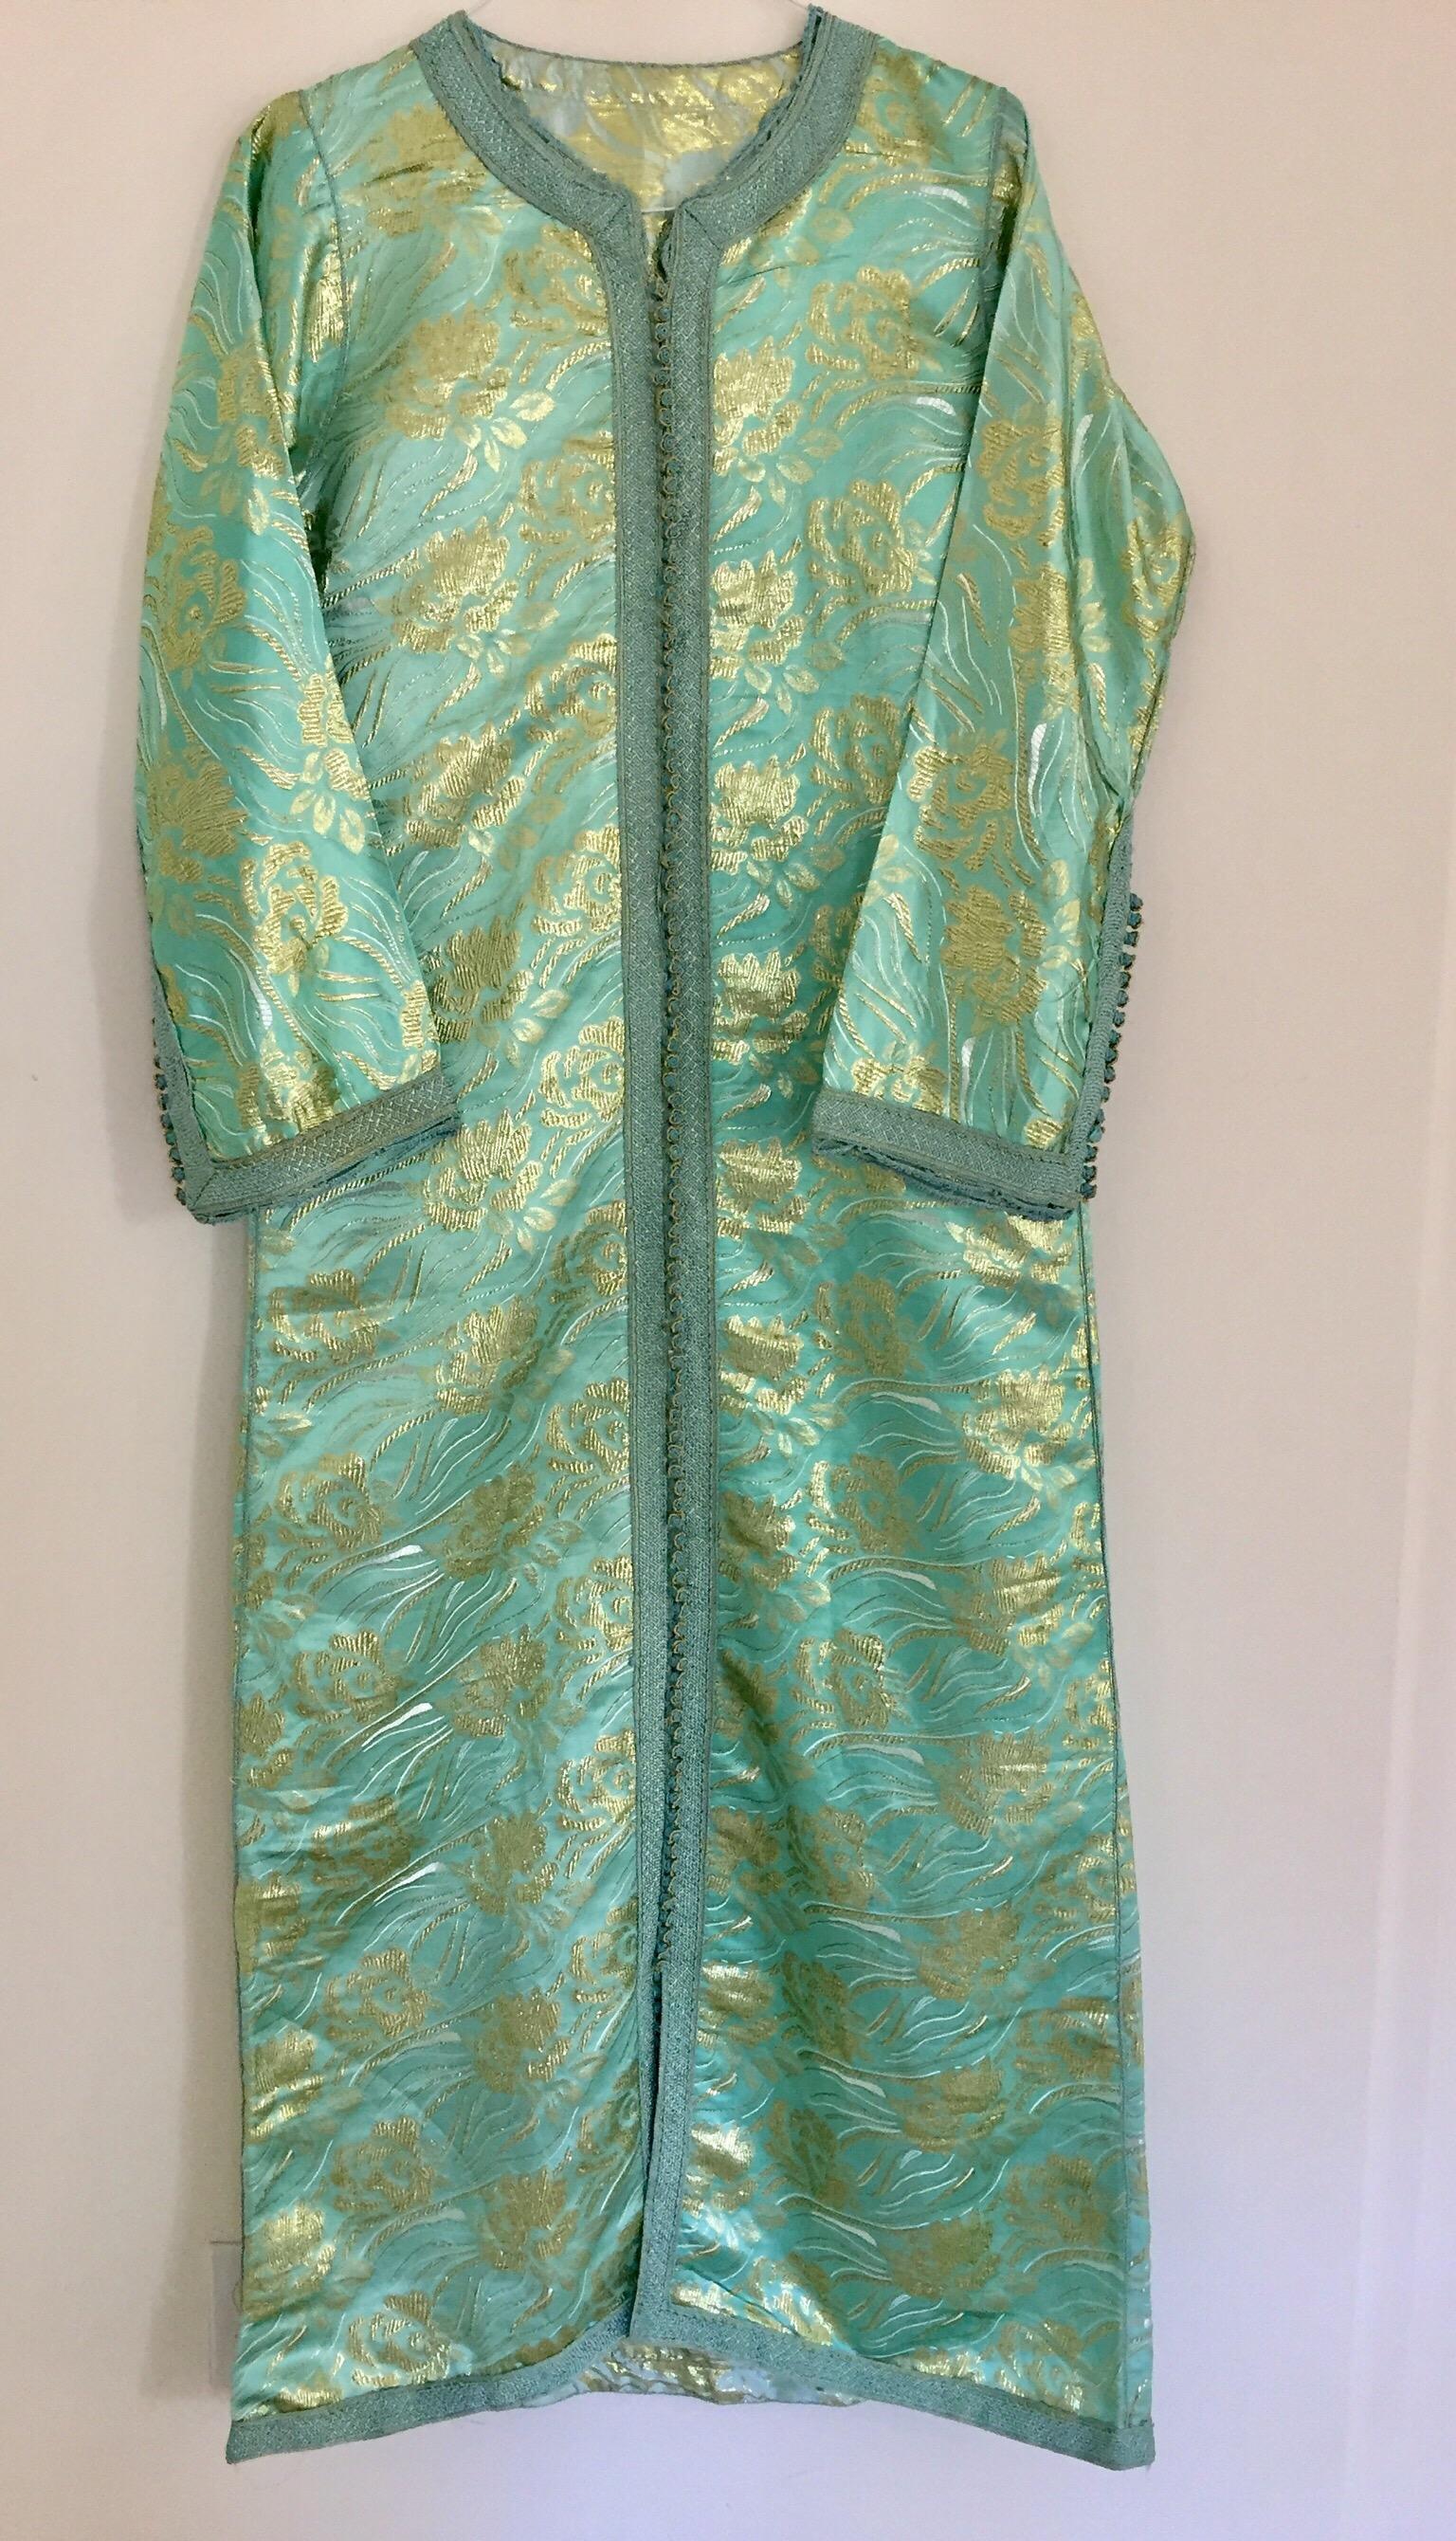 Moroccan Kaftan in Turquoise and Gold Floral Brocade Metallic Lame For Sale 8